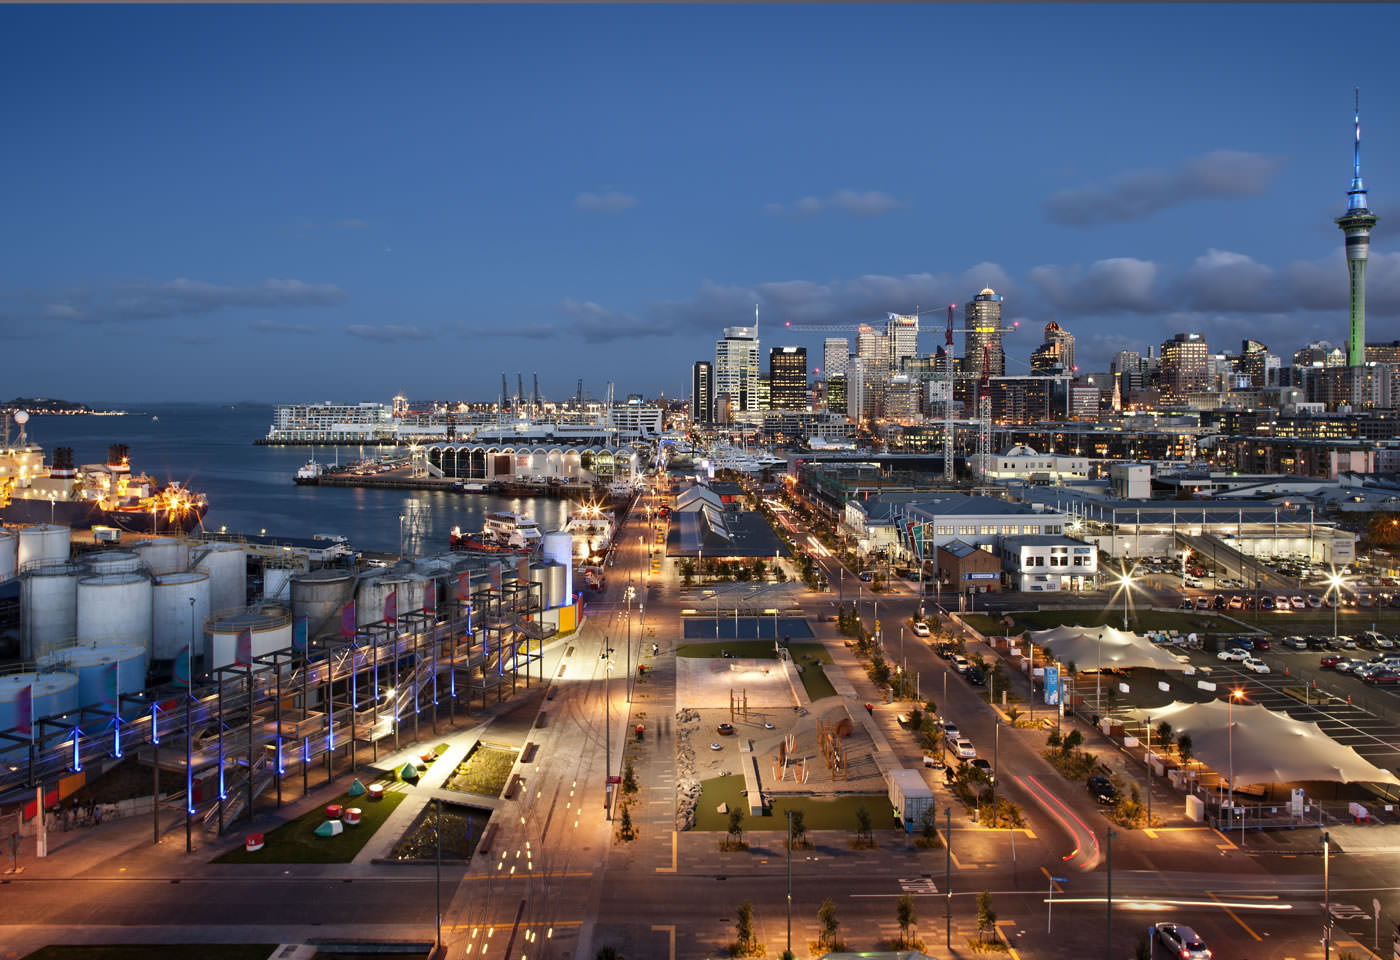 Pictures of the renovated Auckland Waterfront area.